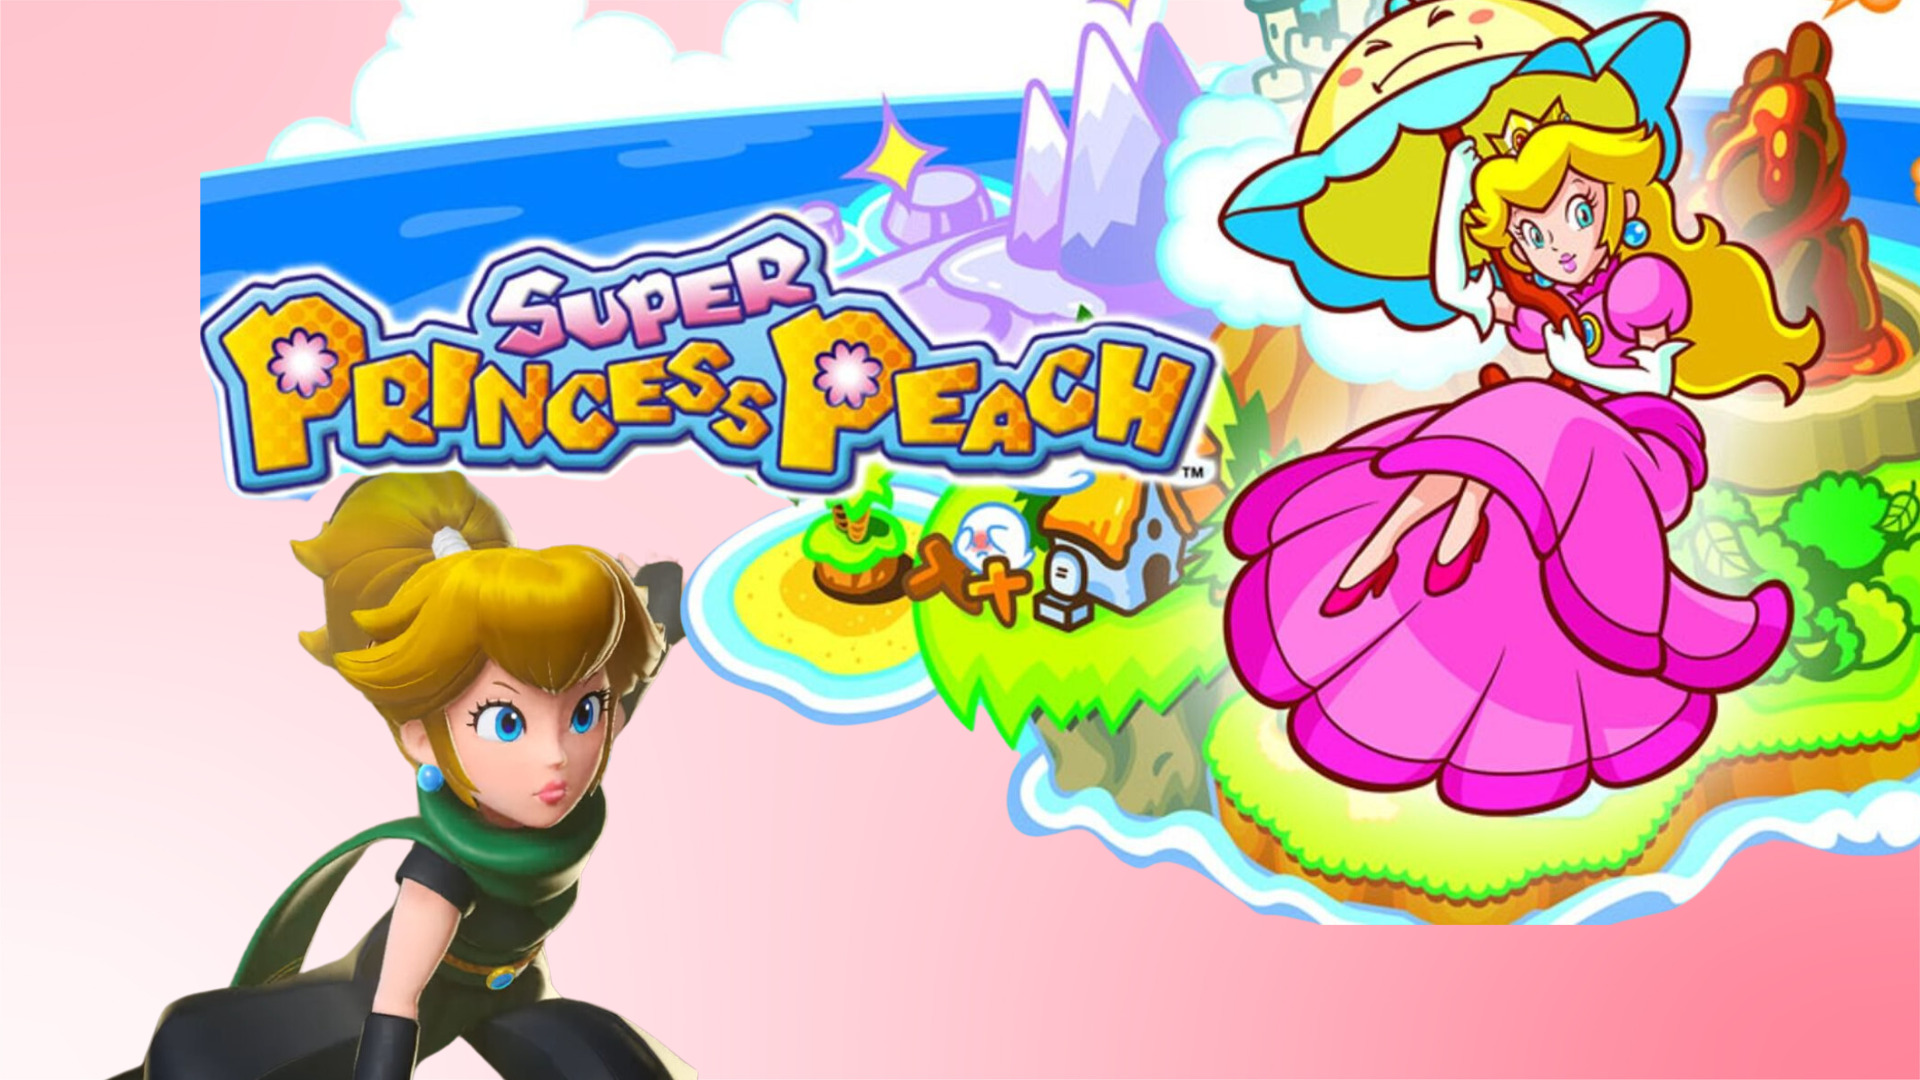 Super Princess Peach: The best DS game you don't remember